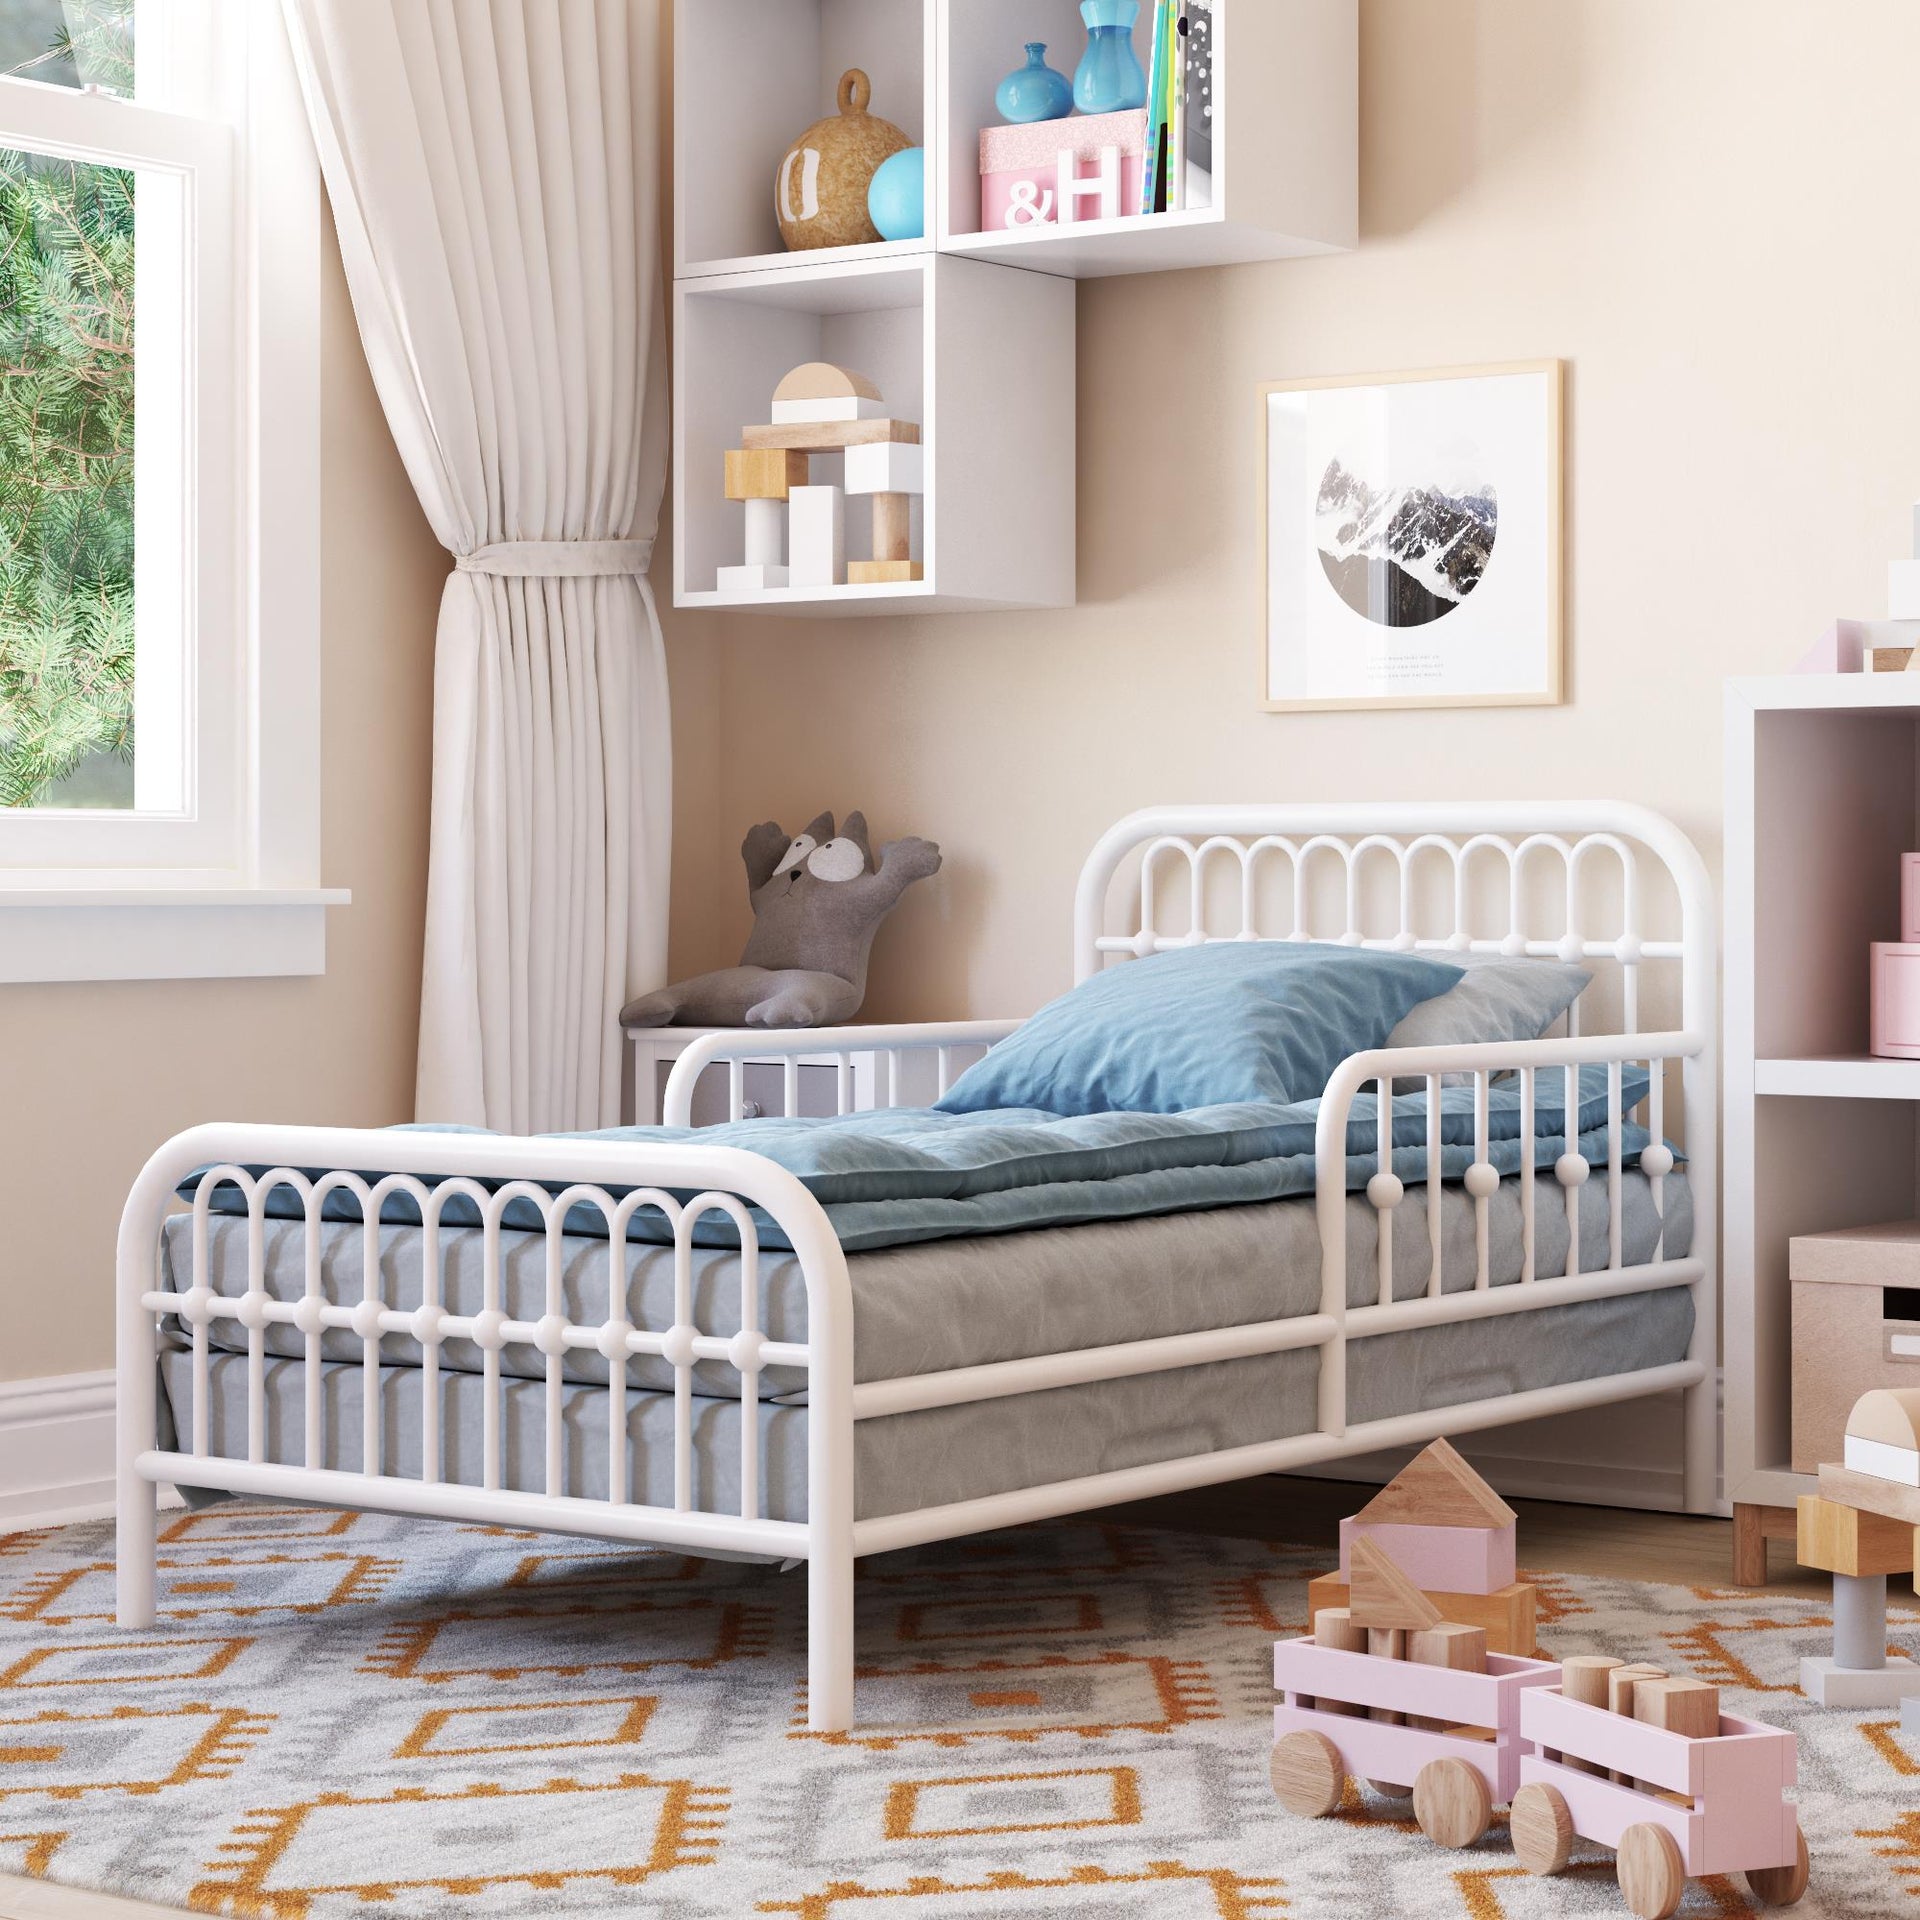 Monarch Hill Ivy Metal Toddler Bed - White